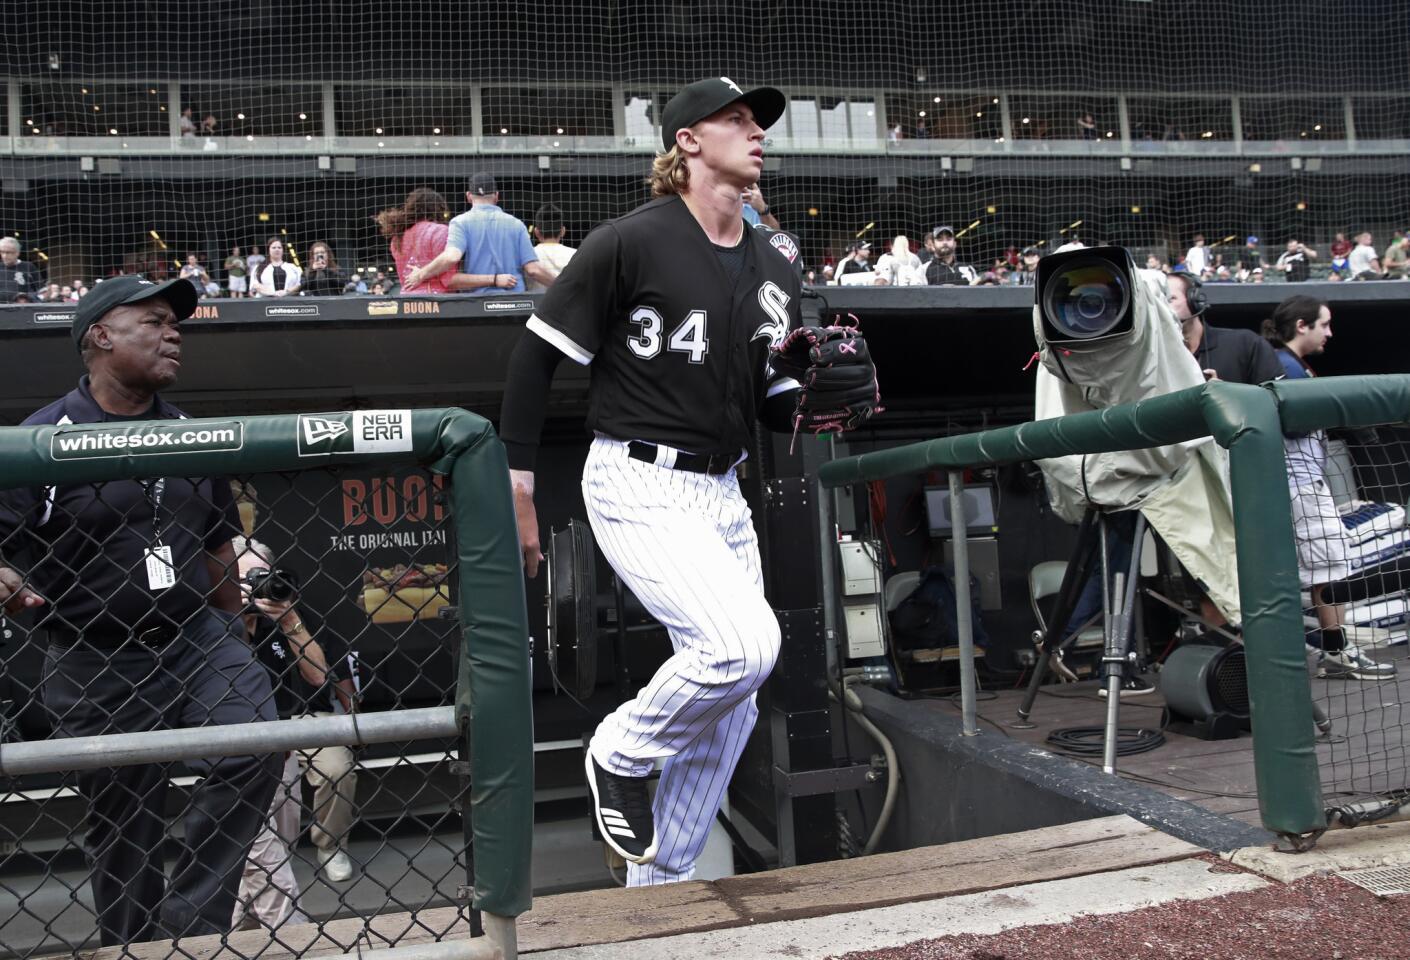 White Sox starting pitcher Michael Kopech, heads to the bullpen for warmups before his MLB debut at Guaranteed Rate Field on Aug. 21, 2018.